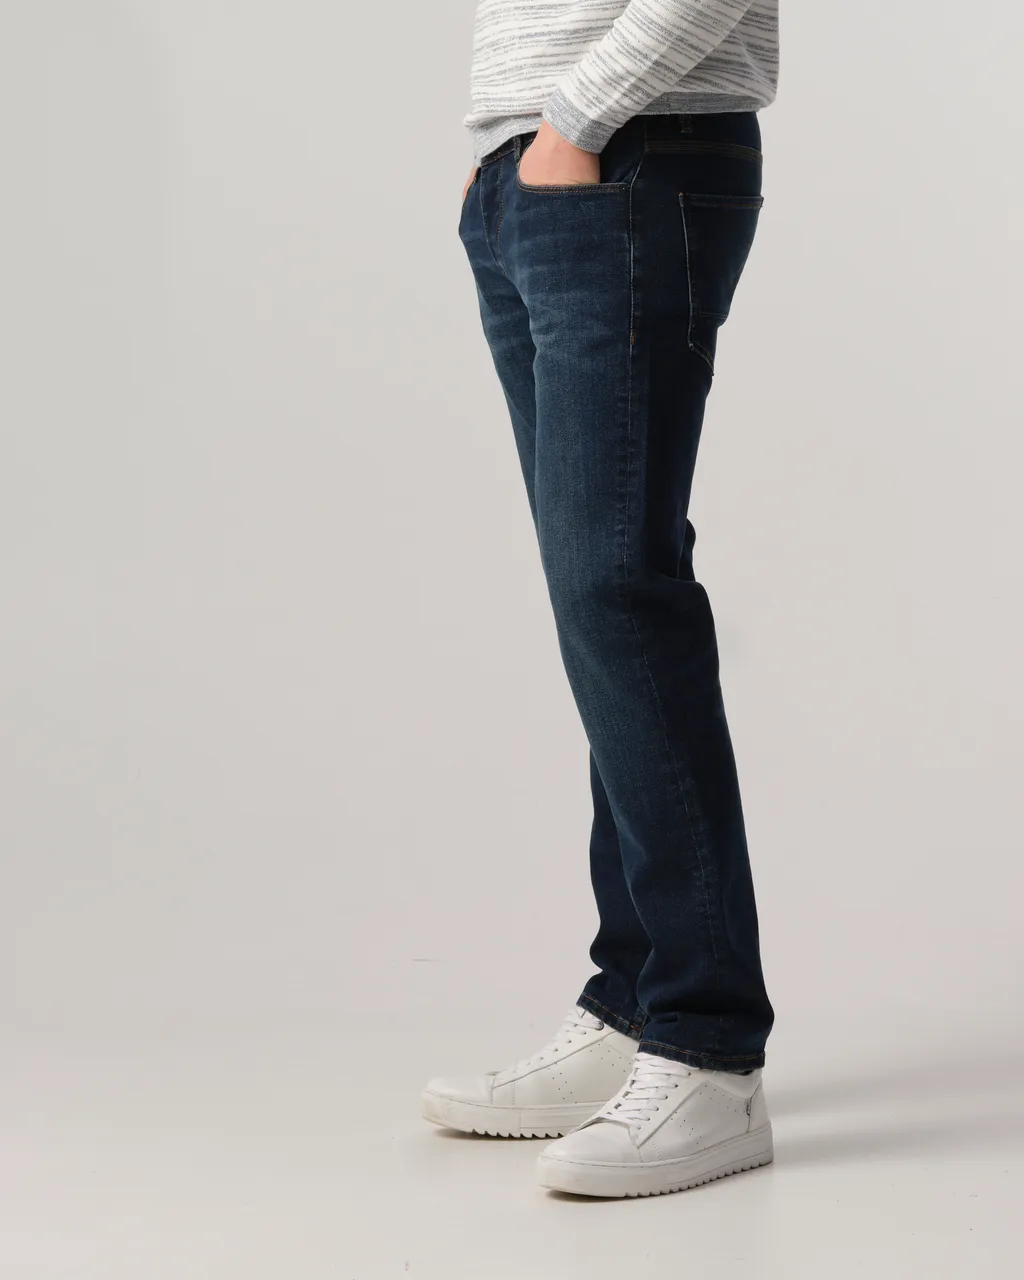 J.C. Rags Joah Heavy Washed Heren Jeans